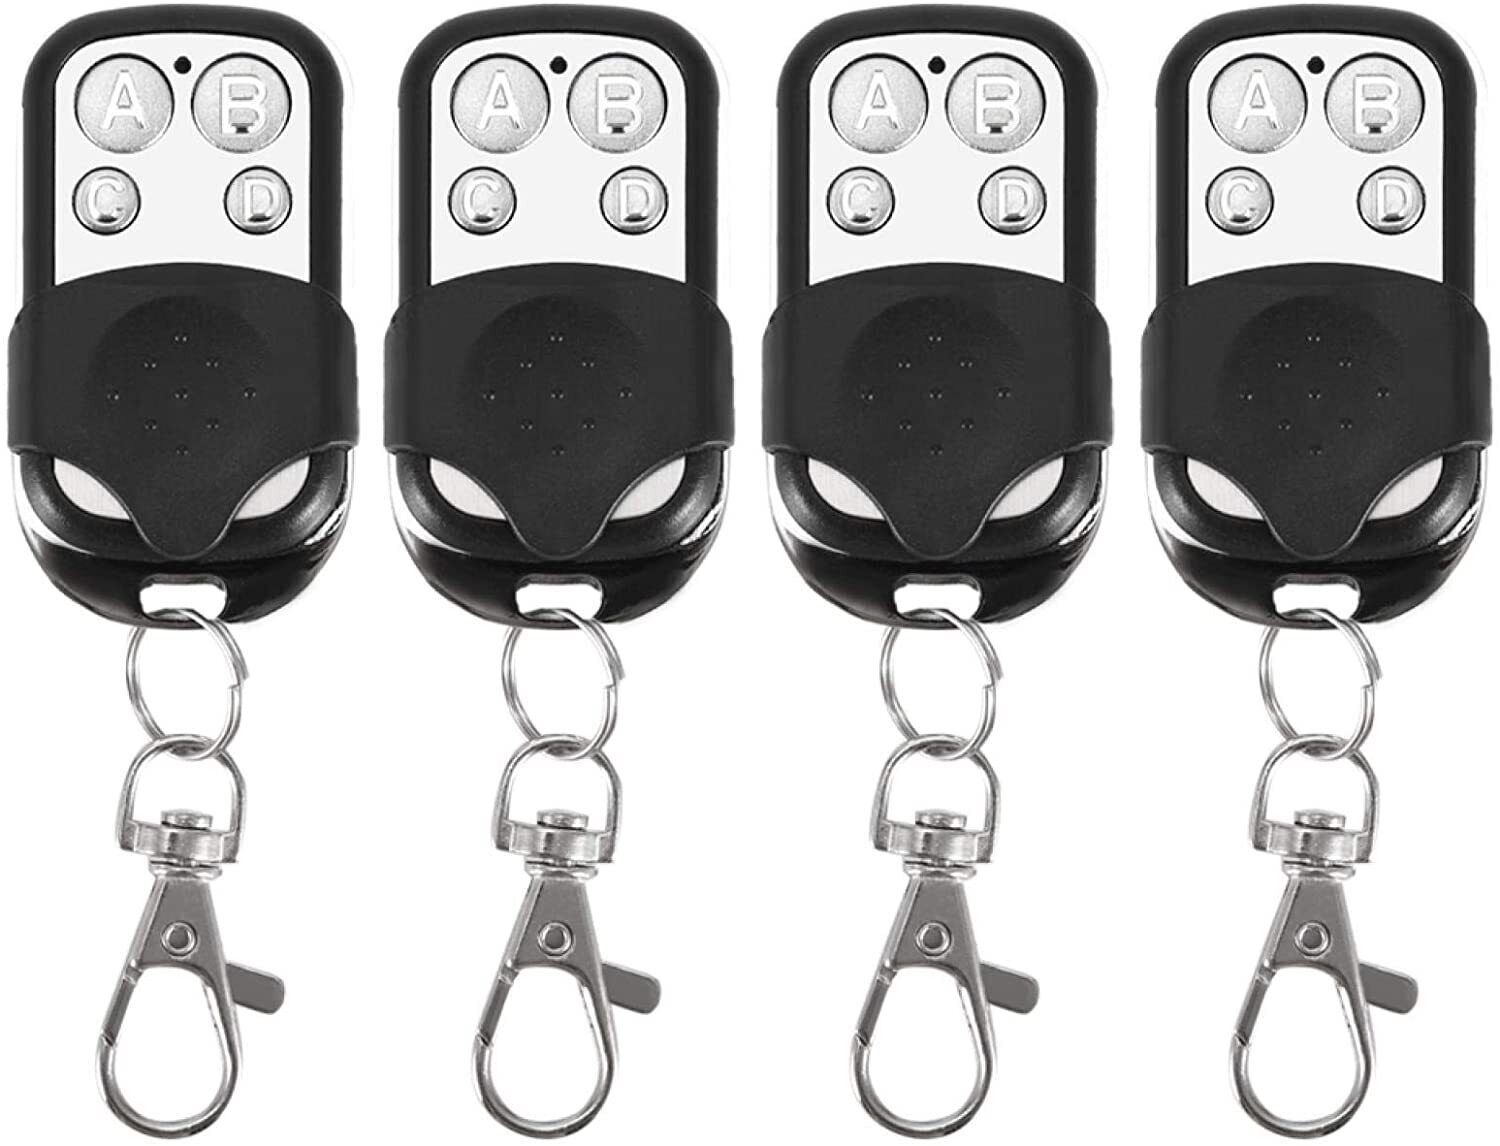 4x Universal Electric Cloning Remote Control Key Fob 433MHz For Gate Garage Door Unbranded Does Not Apply - фотография #3